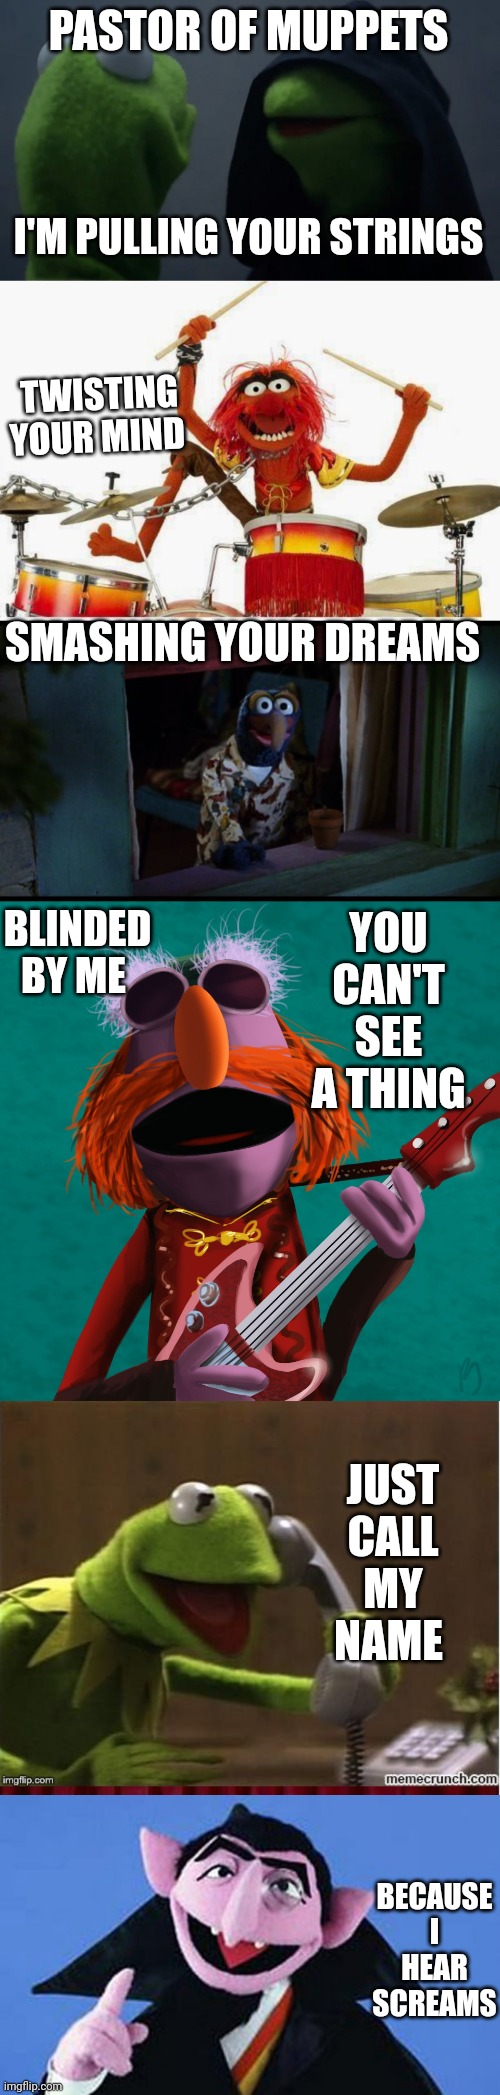  PASTOR OF MUPPETS; I'M PULLING YOUR STRINGS; TWISTING YOUR MIND; SMASHING YOUR DREAMS; BLINDED BY ME; YOU CAN'T SEE A THING; JUST CALL MY NAME; BECAUSE I HEAR SCREAMS | image tagged in evil kermit,animal,gonzo muppets looking at the moon,floyd pepper,kermit muppet show calls,muppets | made w/ Imgflip meme maker